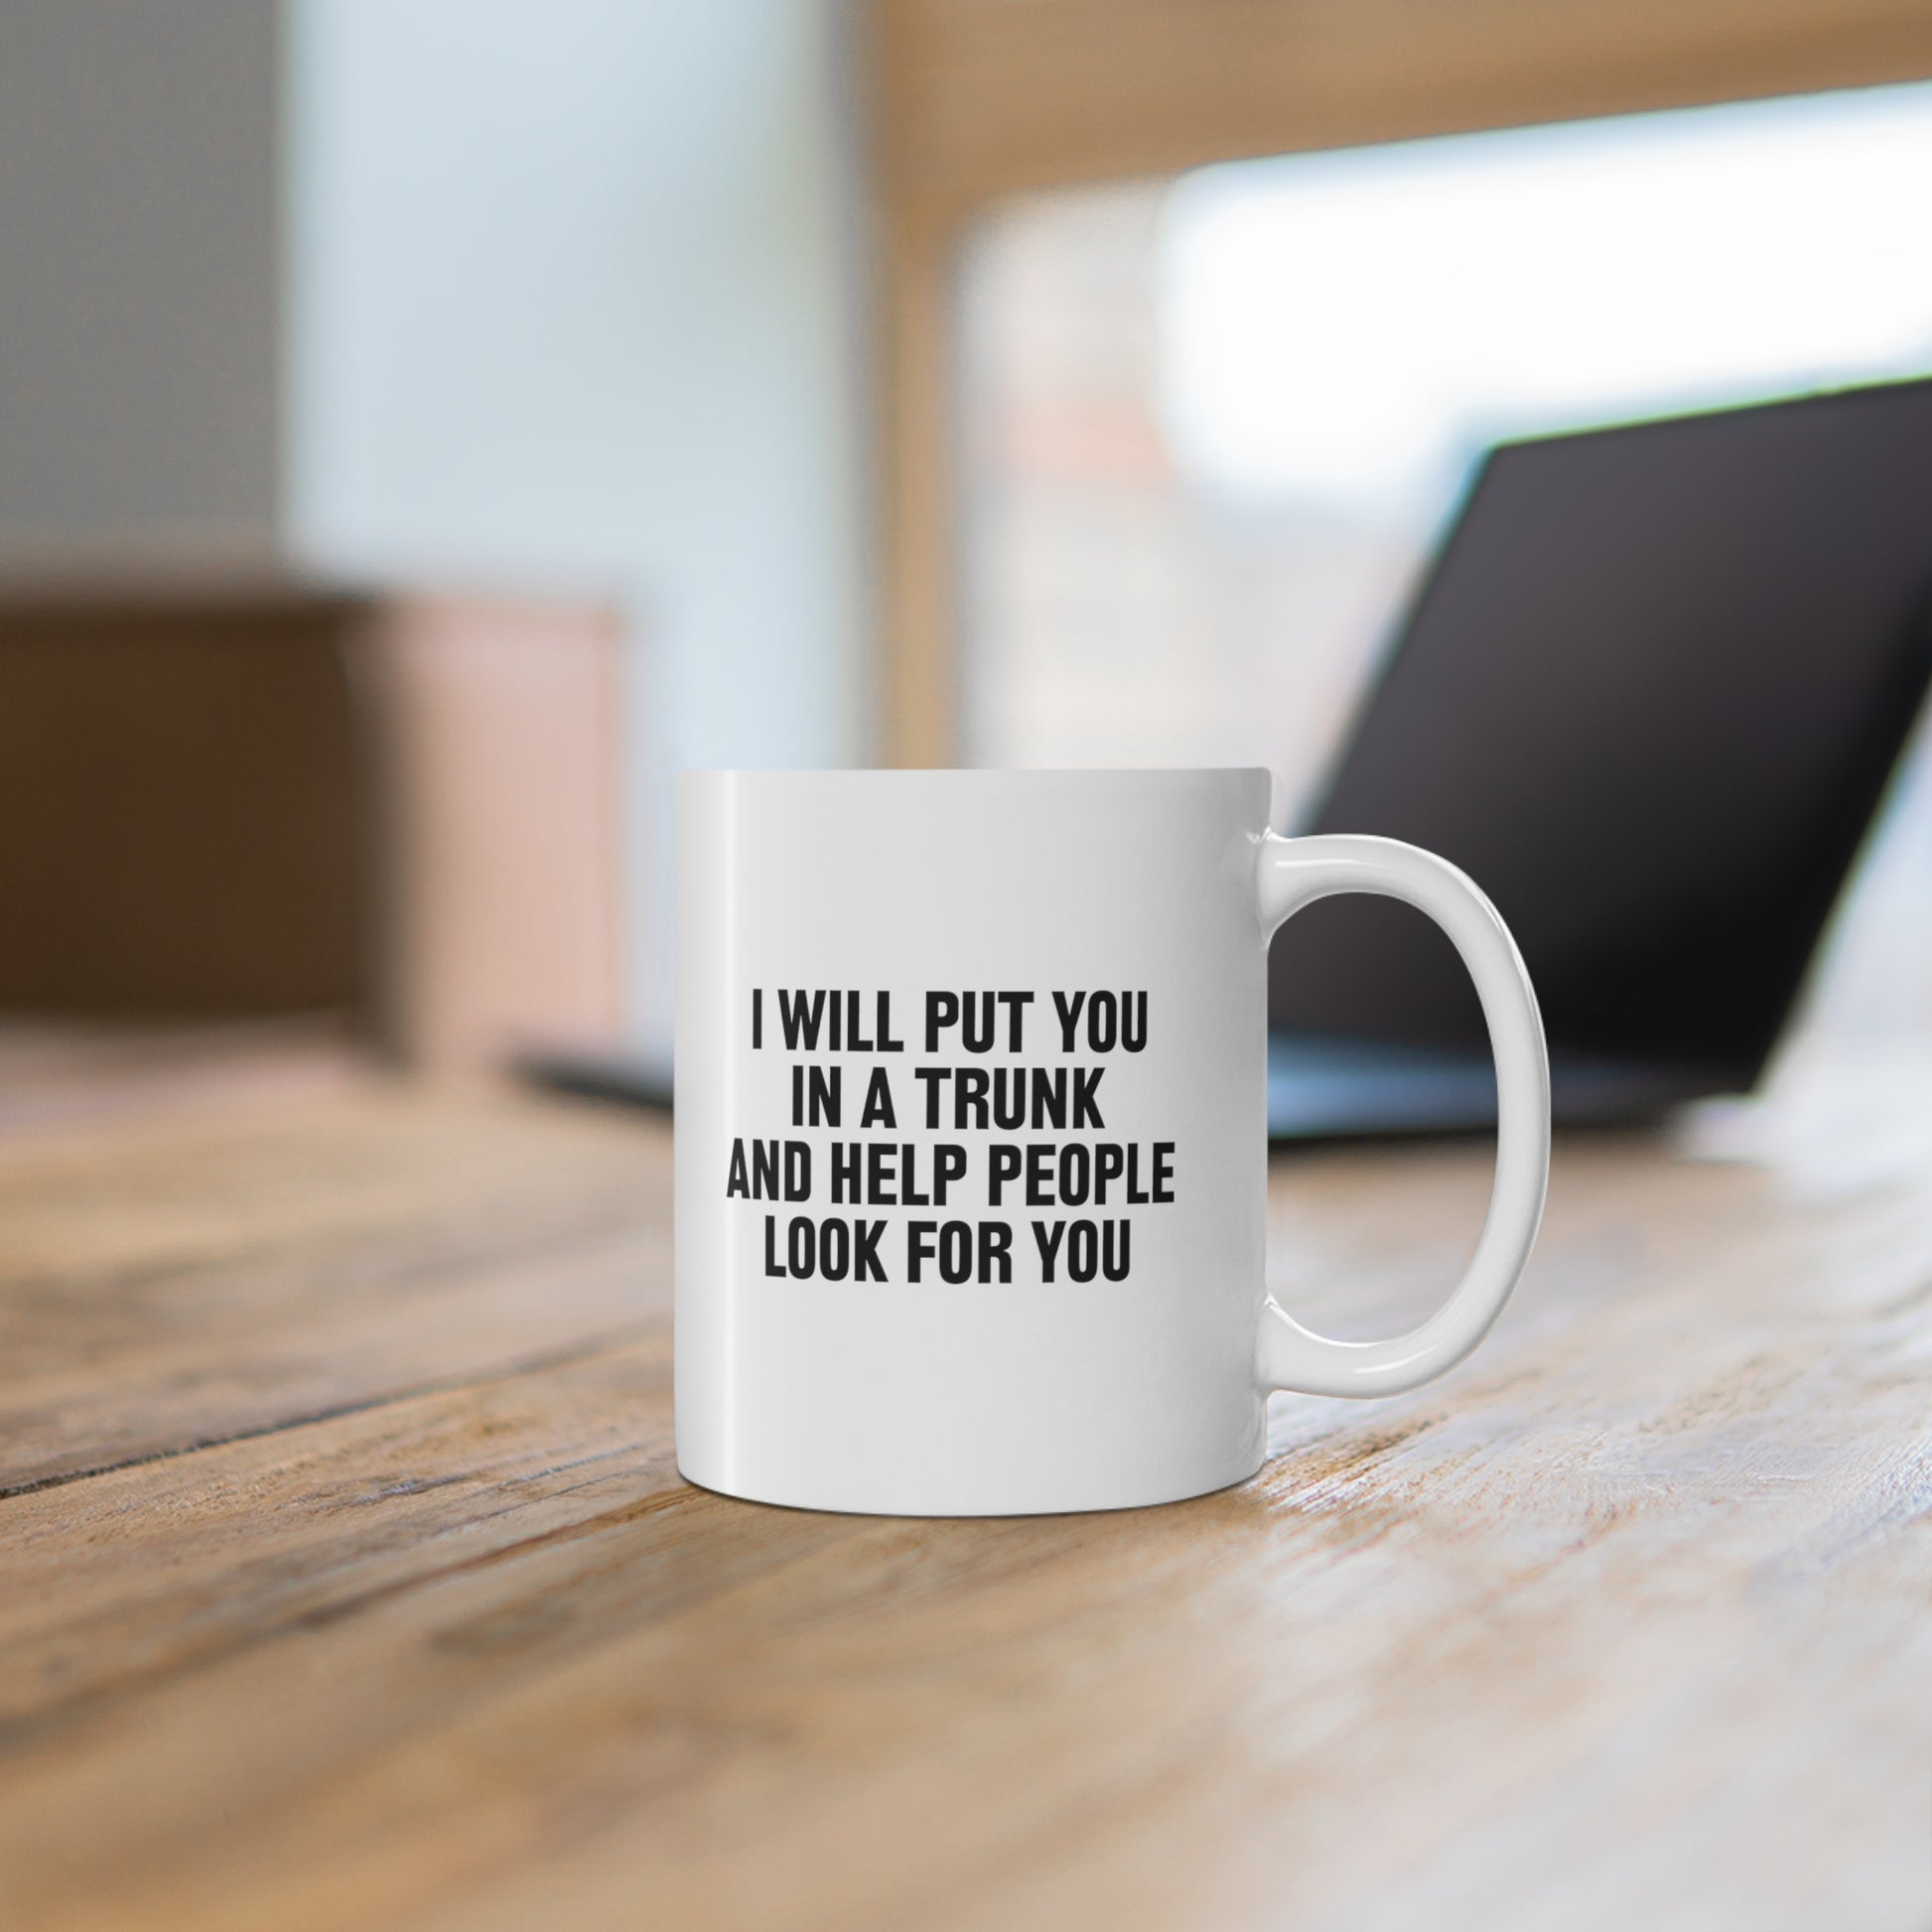 ceramic mug with quote: I Will Put You in a Trunk and Help People Look for You